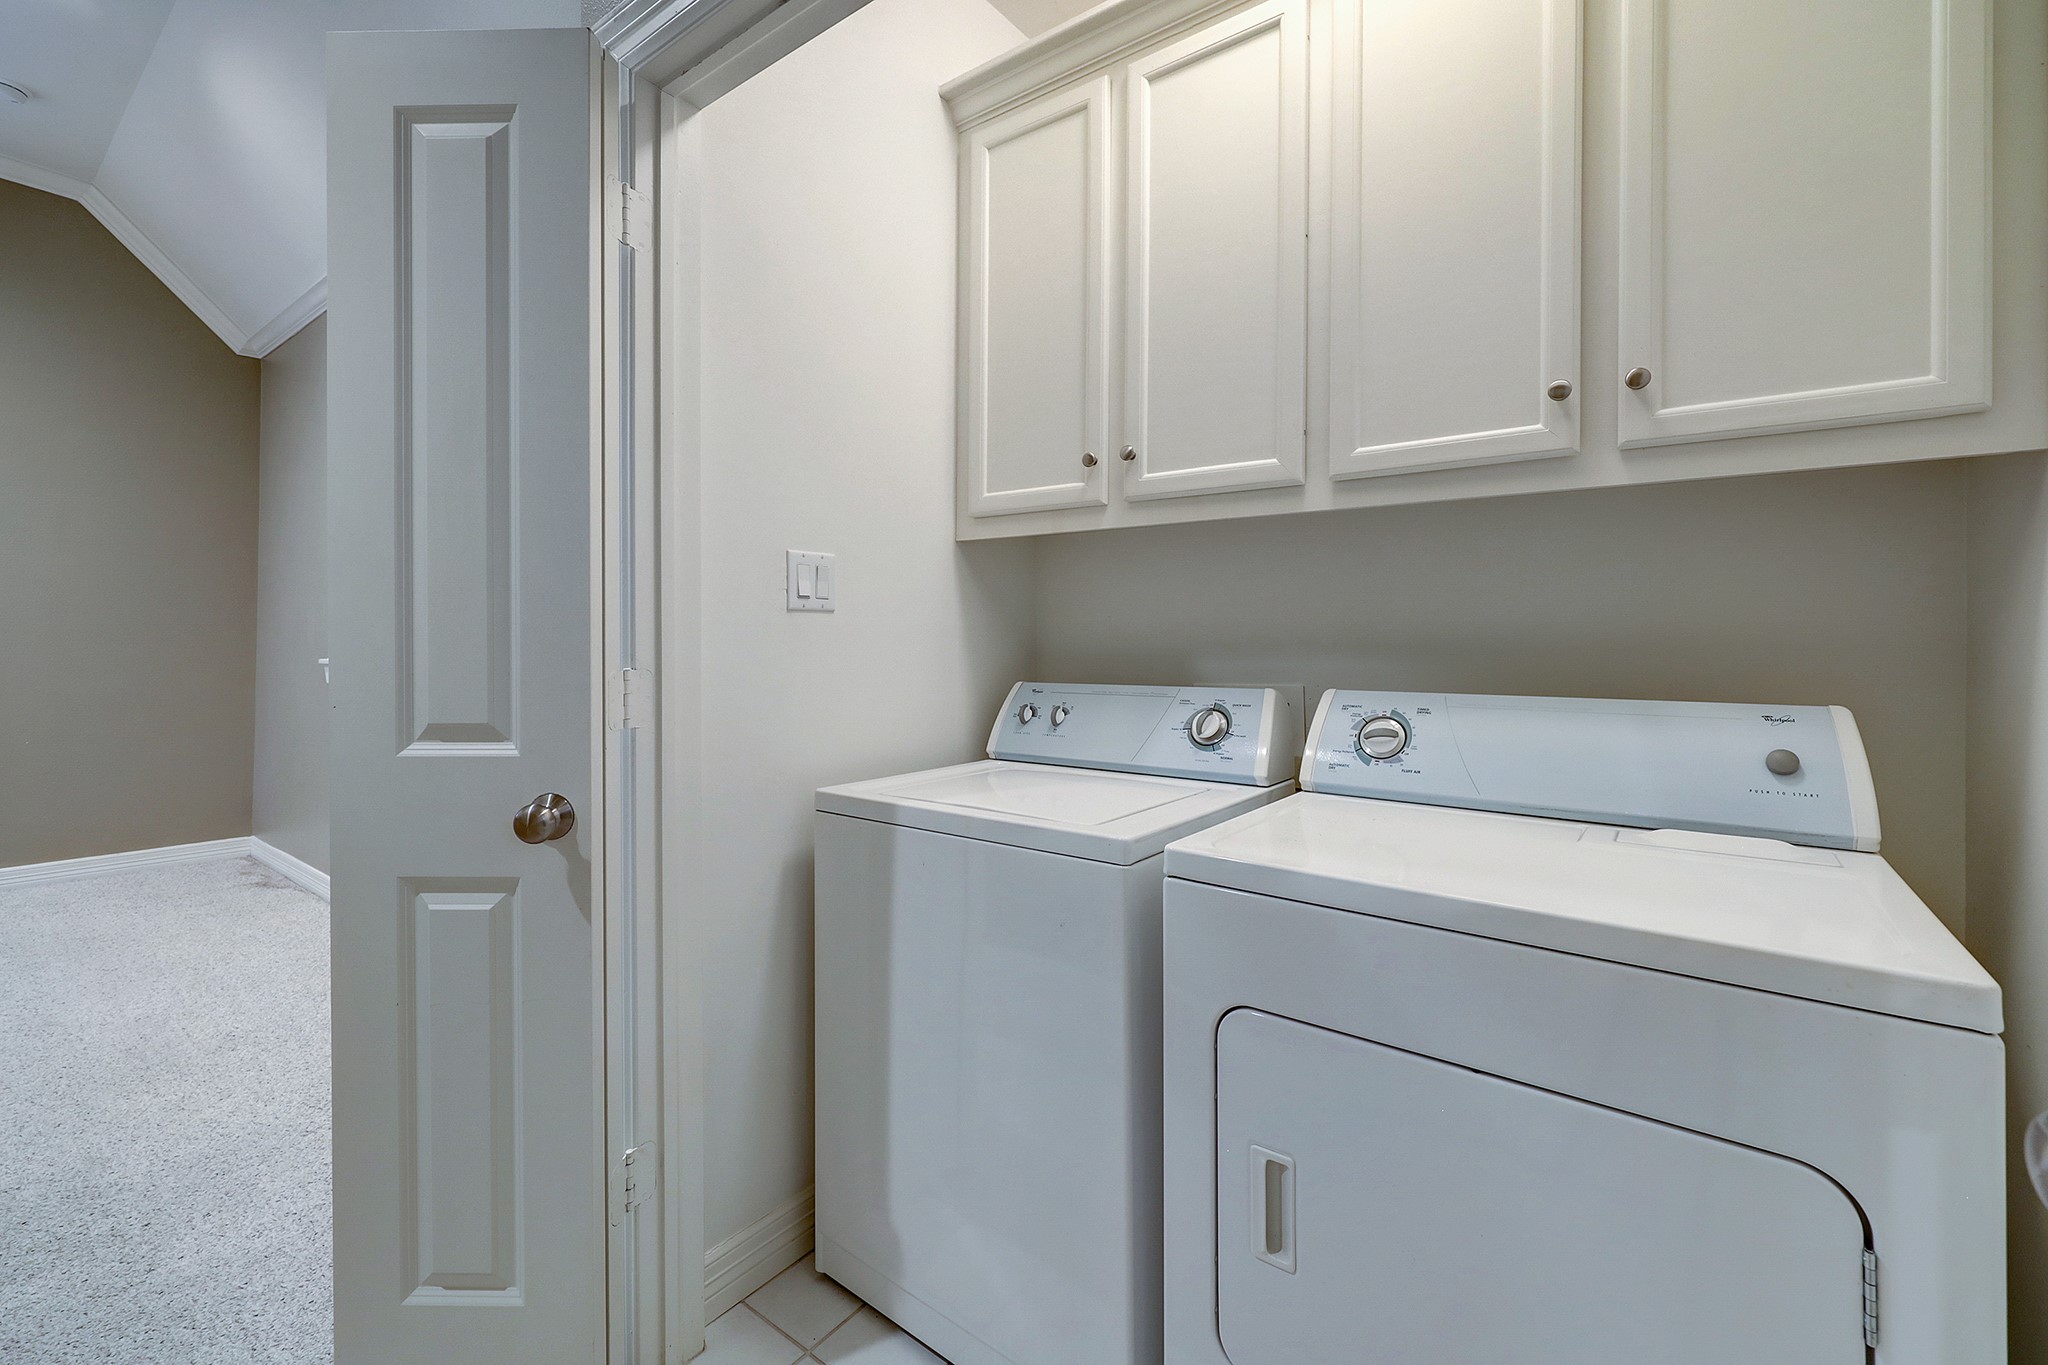 The laundry room is conveniently located on the third floor outside of the primary bedroom.